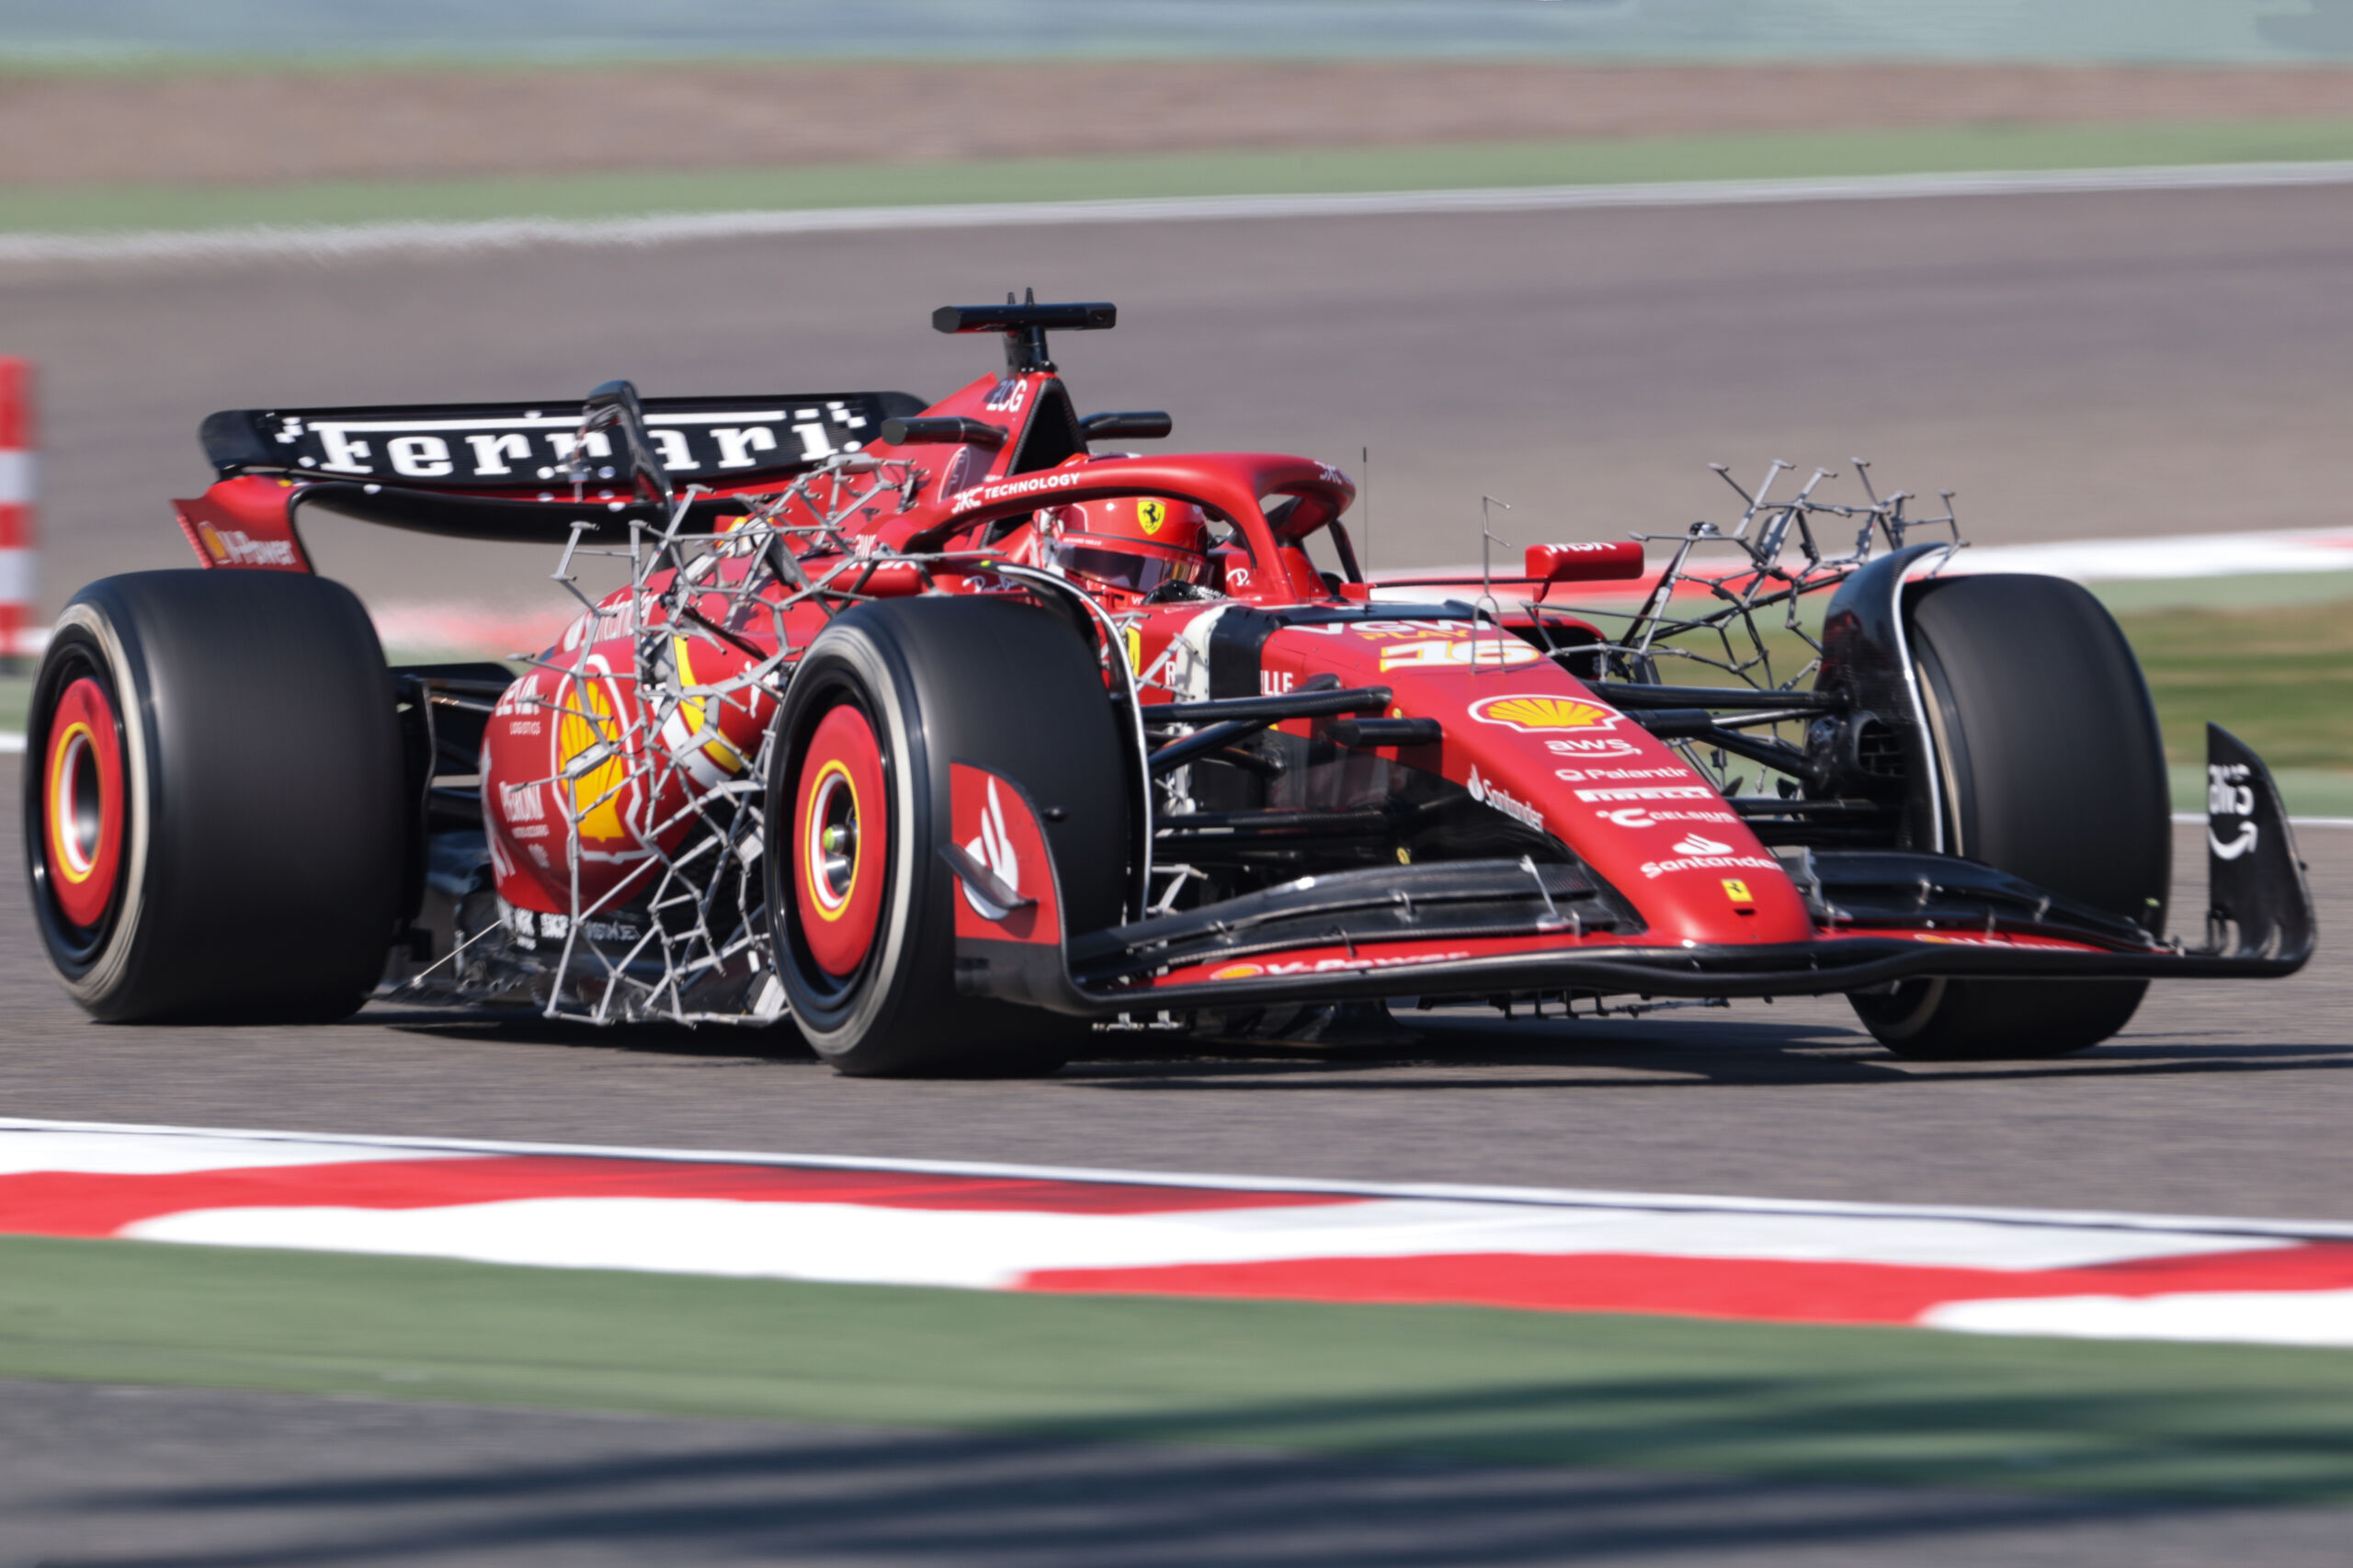 Here's what we know after three days of Formula 1 preseason testing